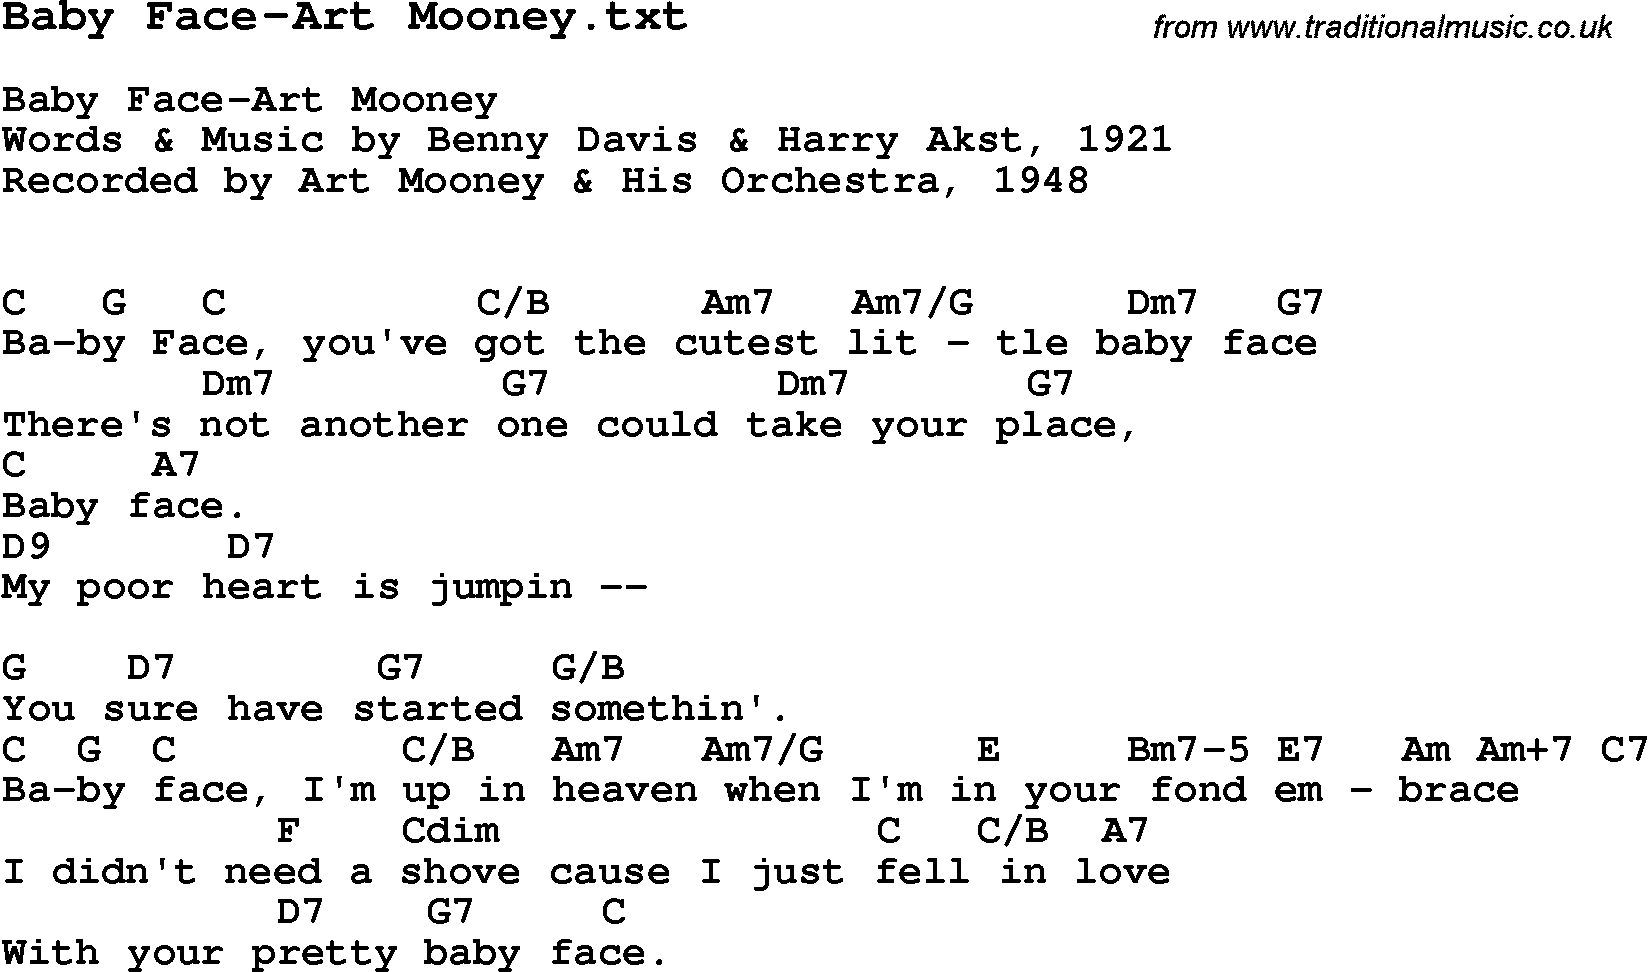 Jazz Song from top bands and vocal artists with chords, tabs and lyrics - Baby Face-Art Mooney